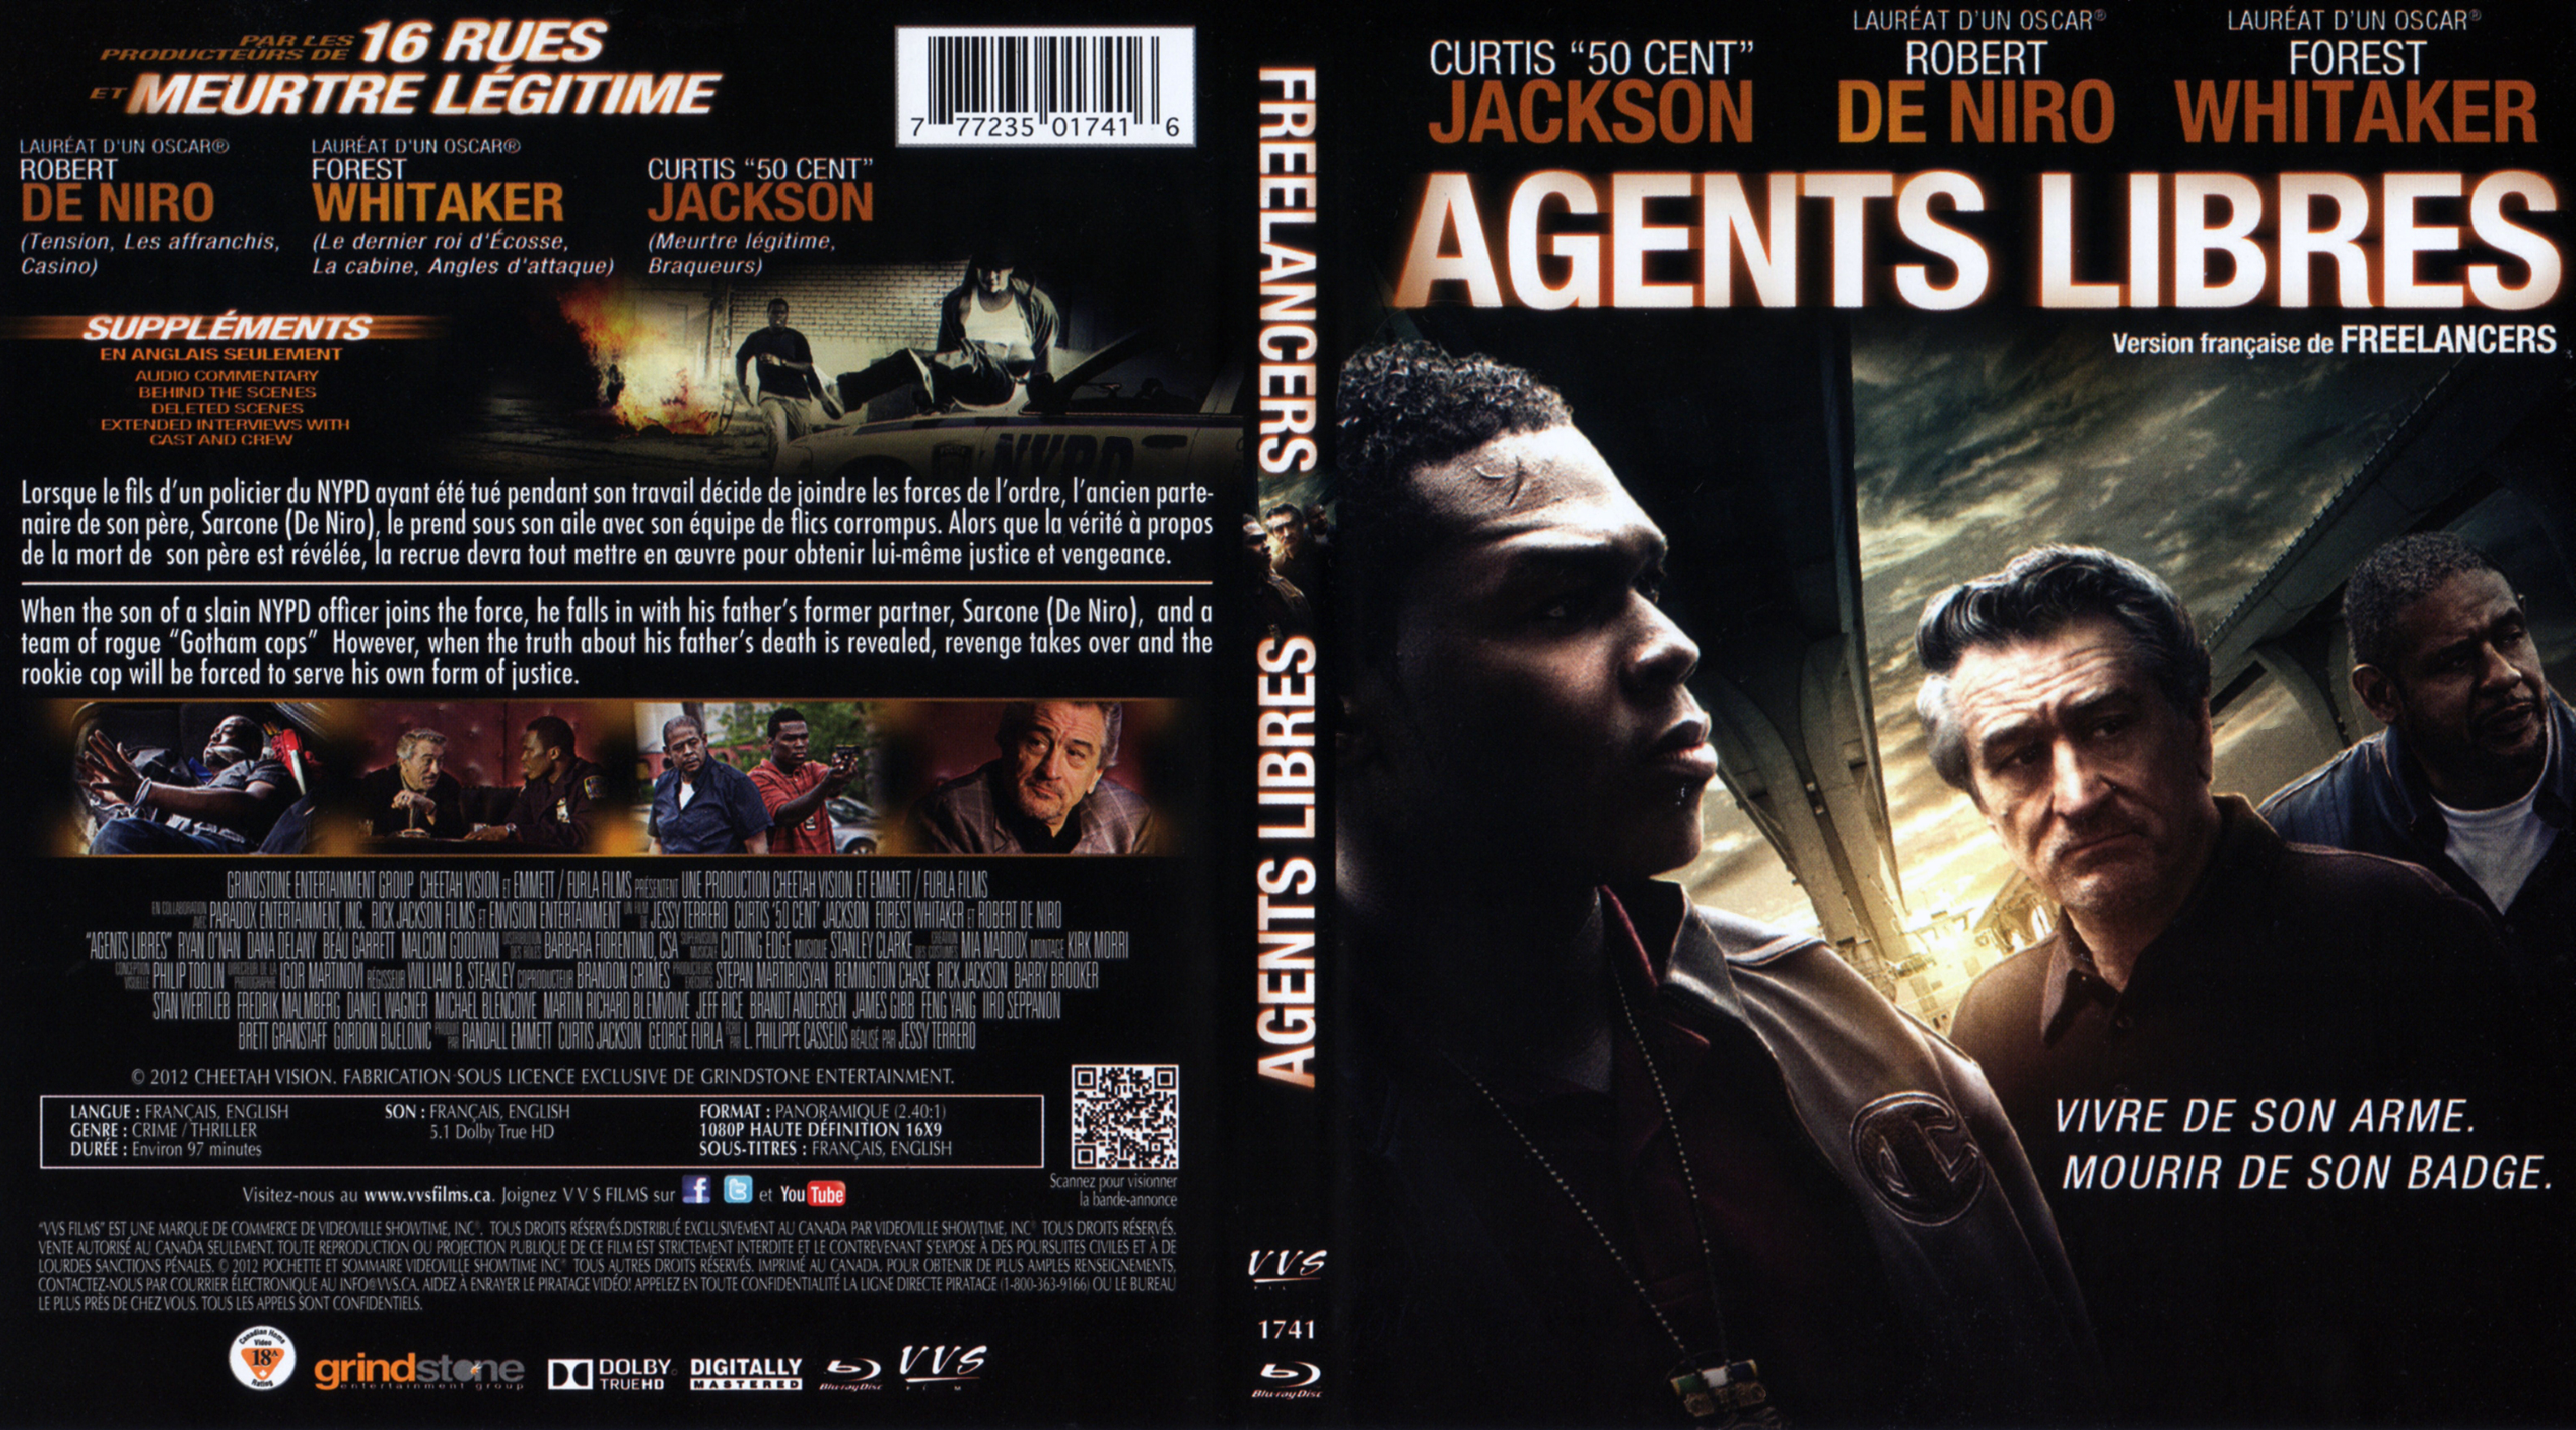 Jaquette DVD Agents libres - Freelancers (Canadienne) (BLU-RAY)